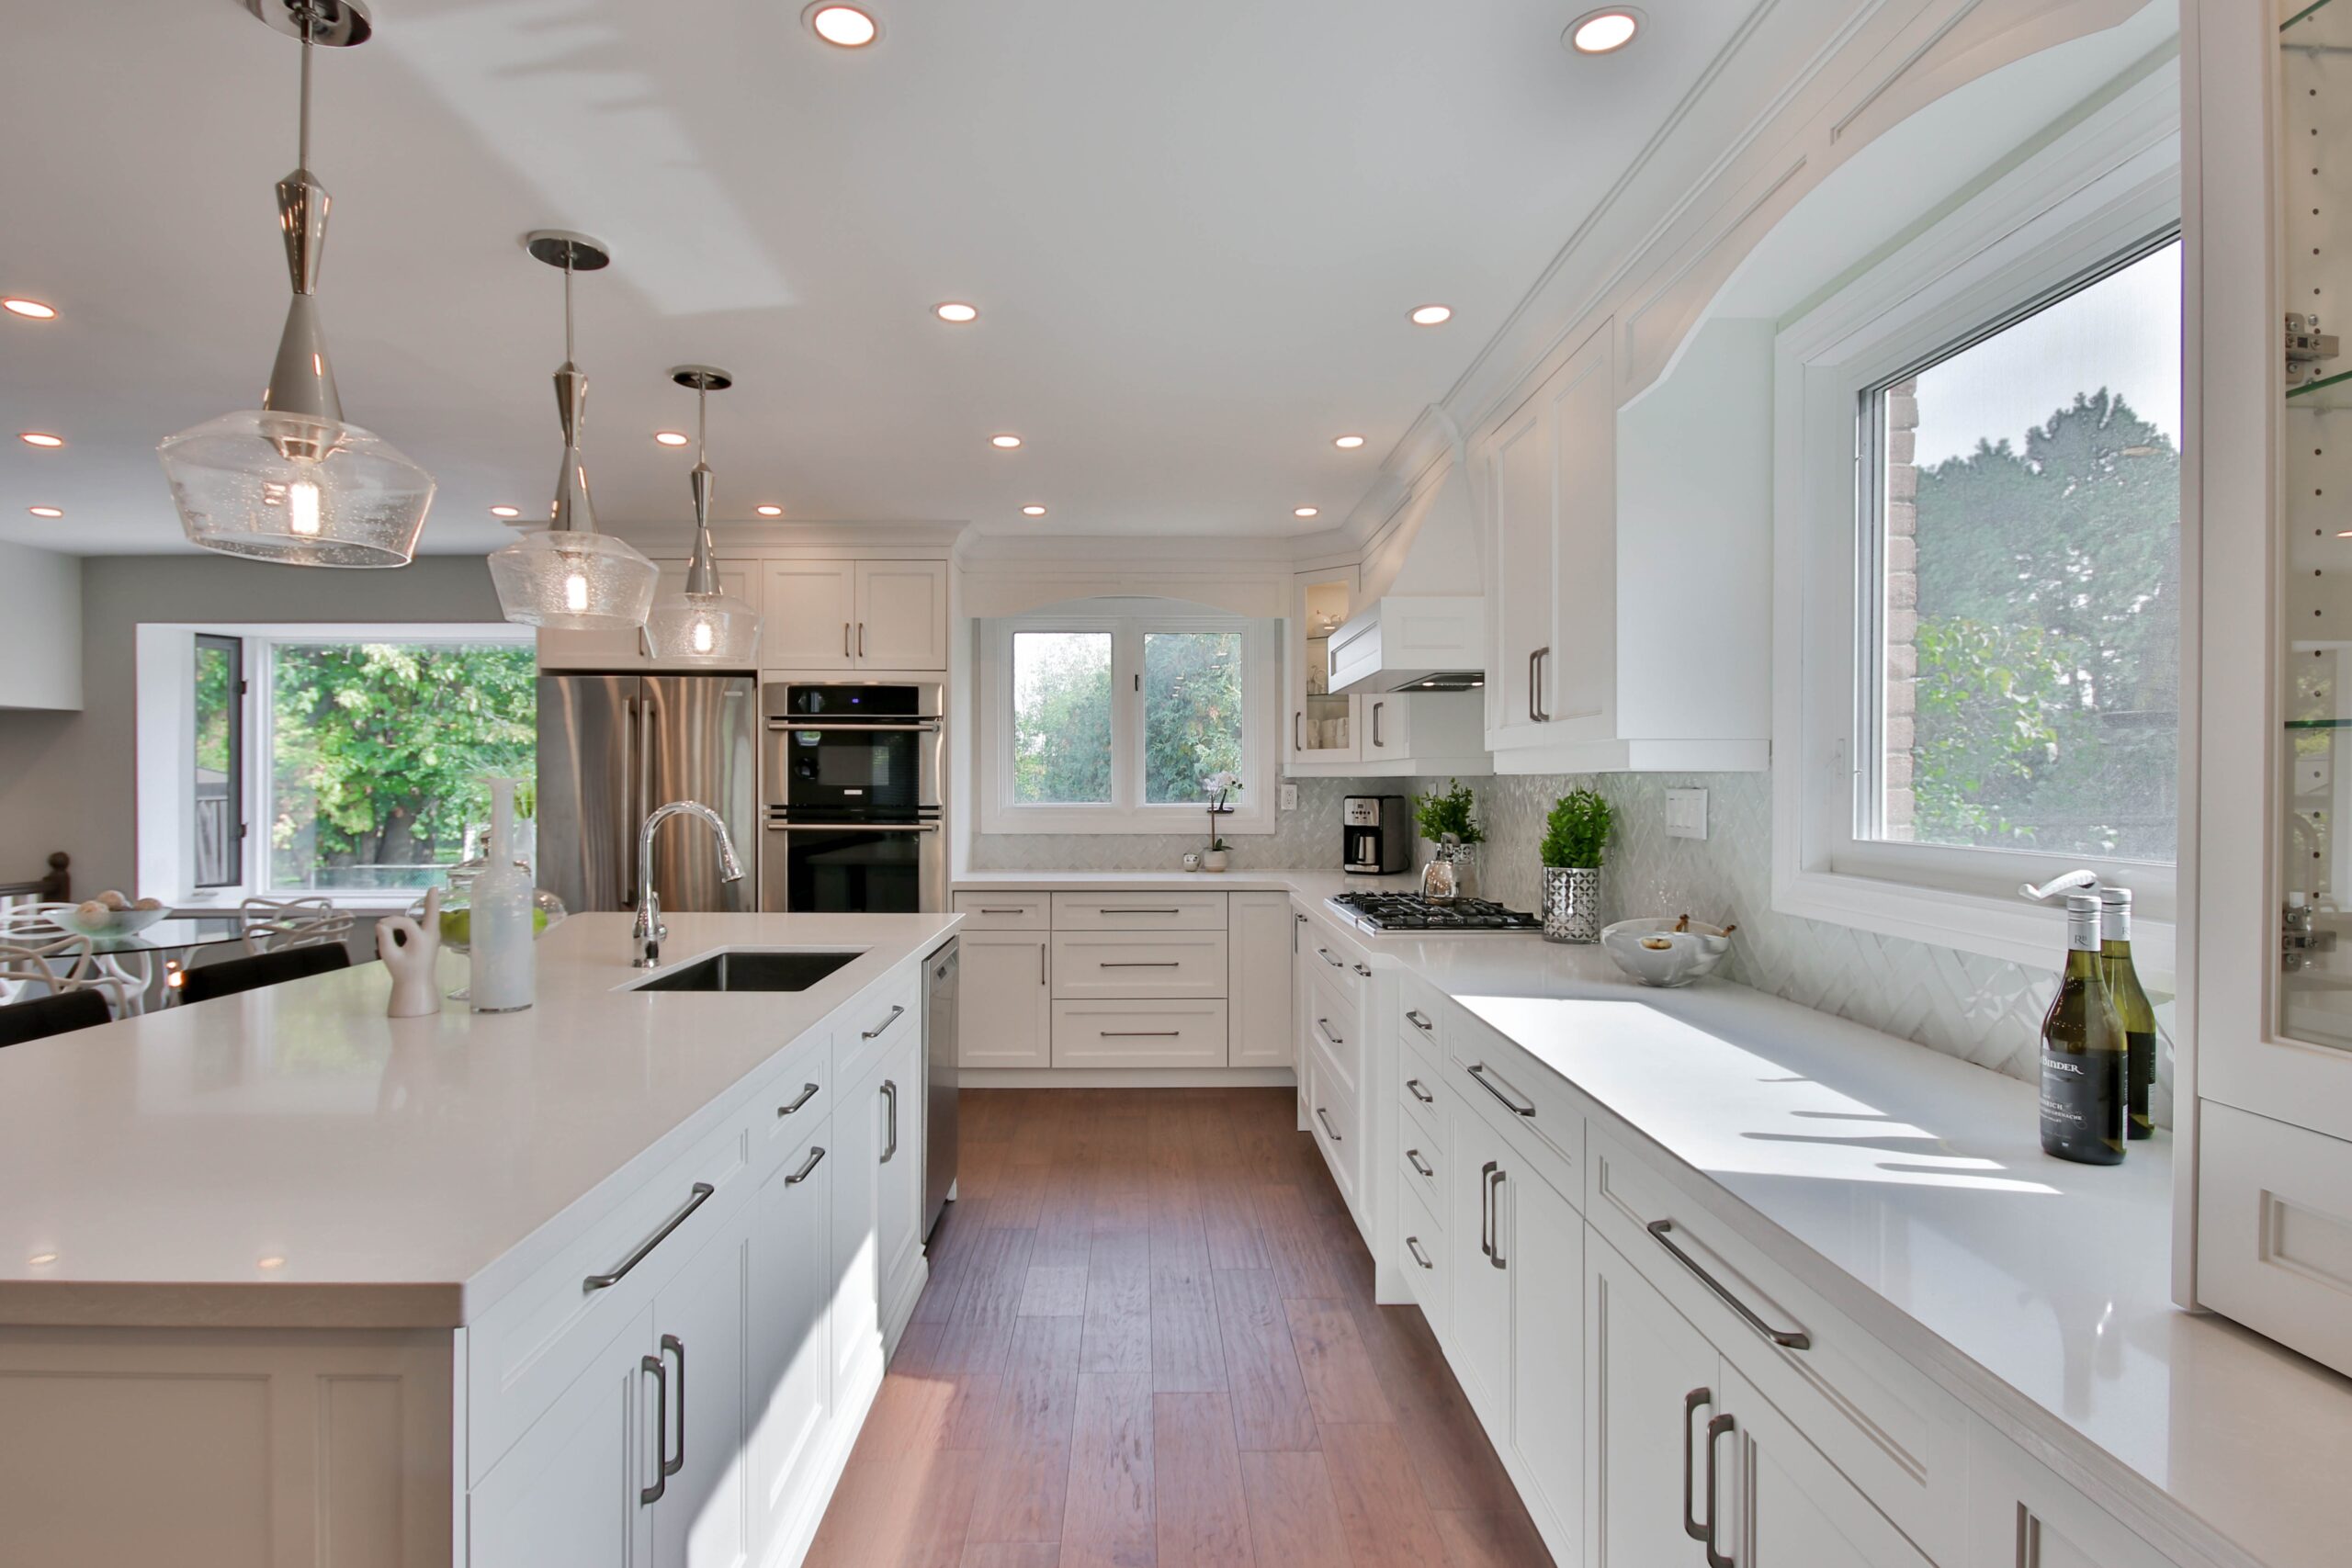 Keep things sweet and simple with this kitchen floor idea. Hardwood is easy to clean and keeps things simple when decorating. Pictured: A kitchen with hardwood flooring and white cabinetry. 